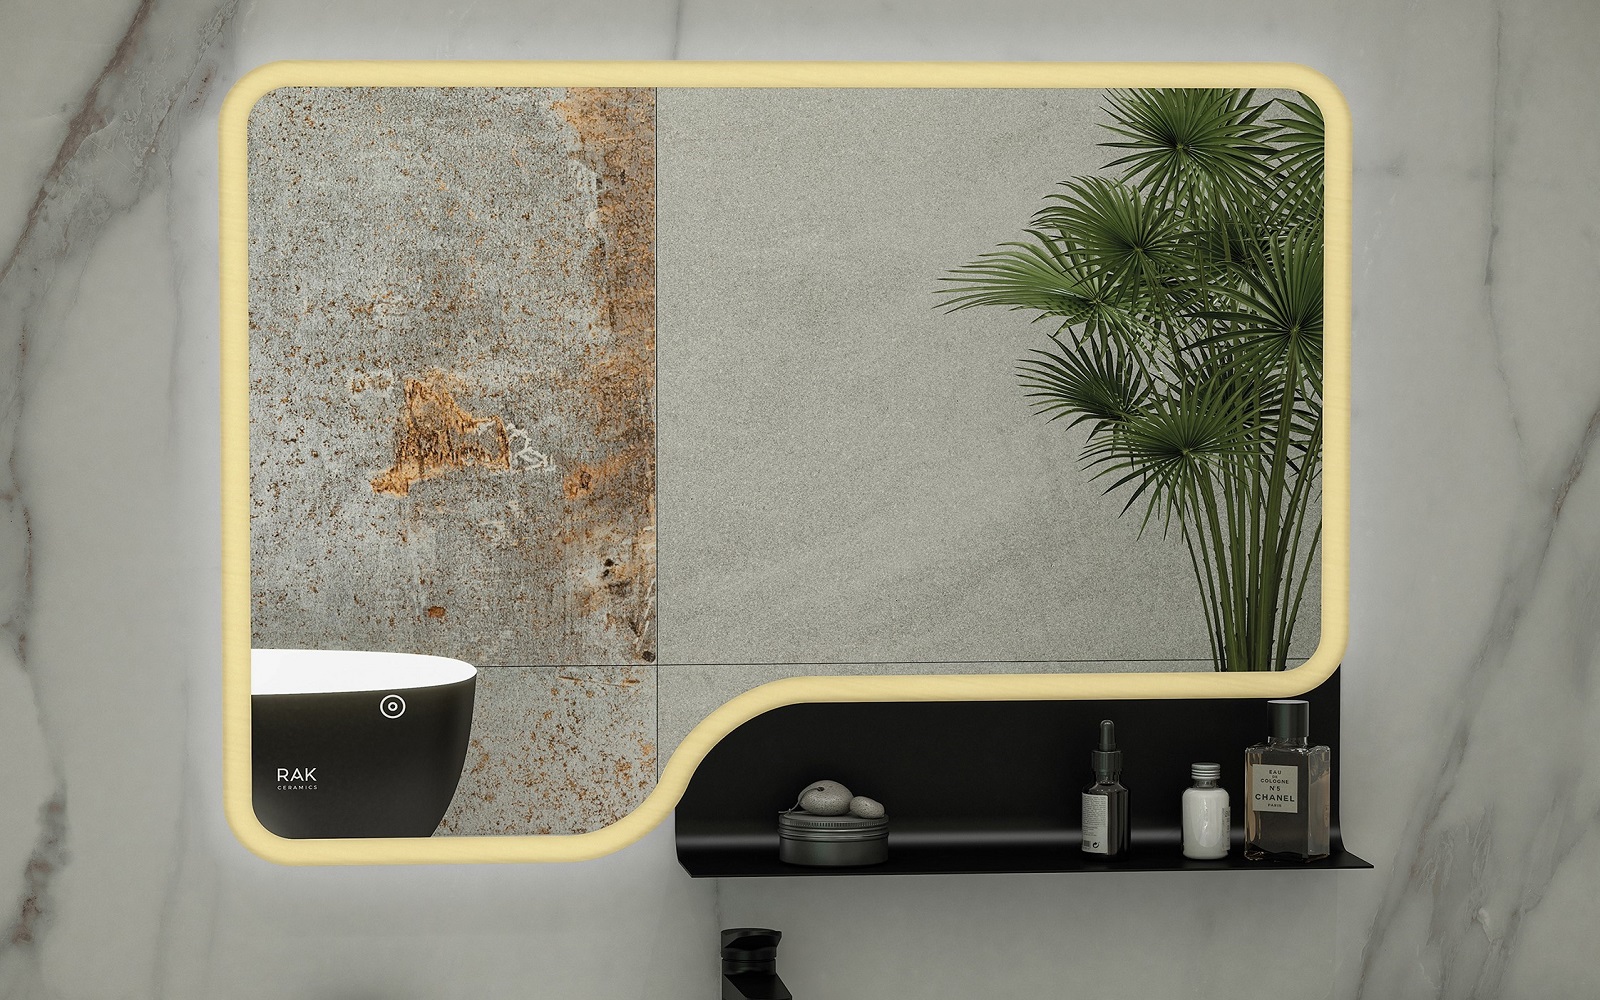 RAK Ornate bathroom mirror with marble wall and plant reflections